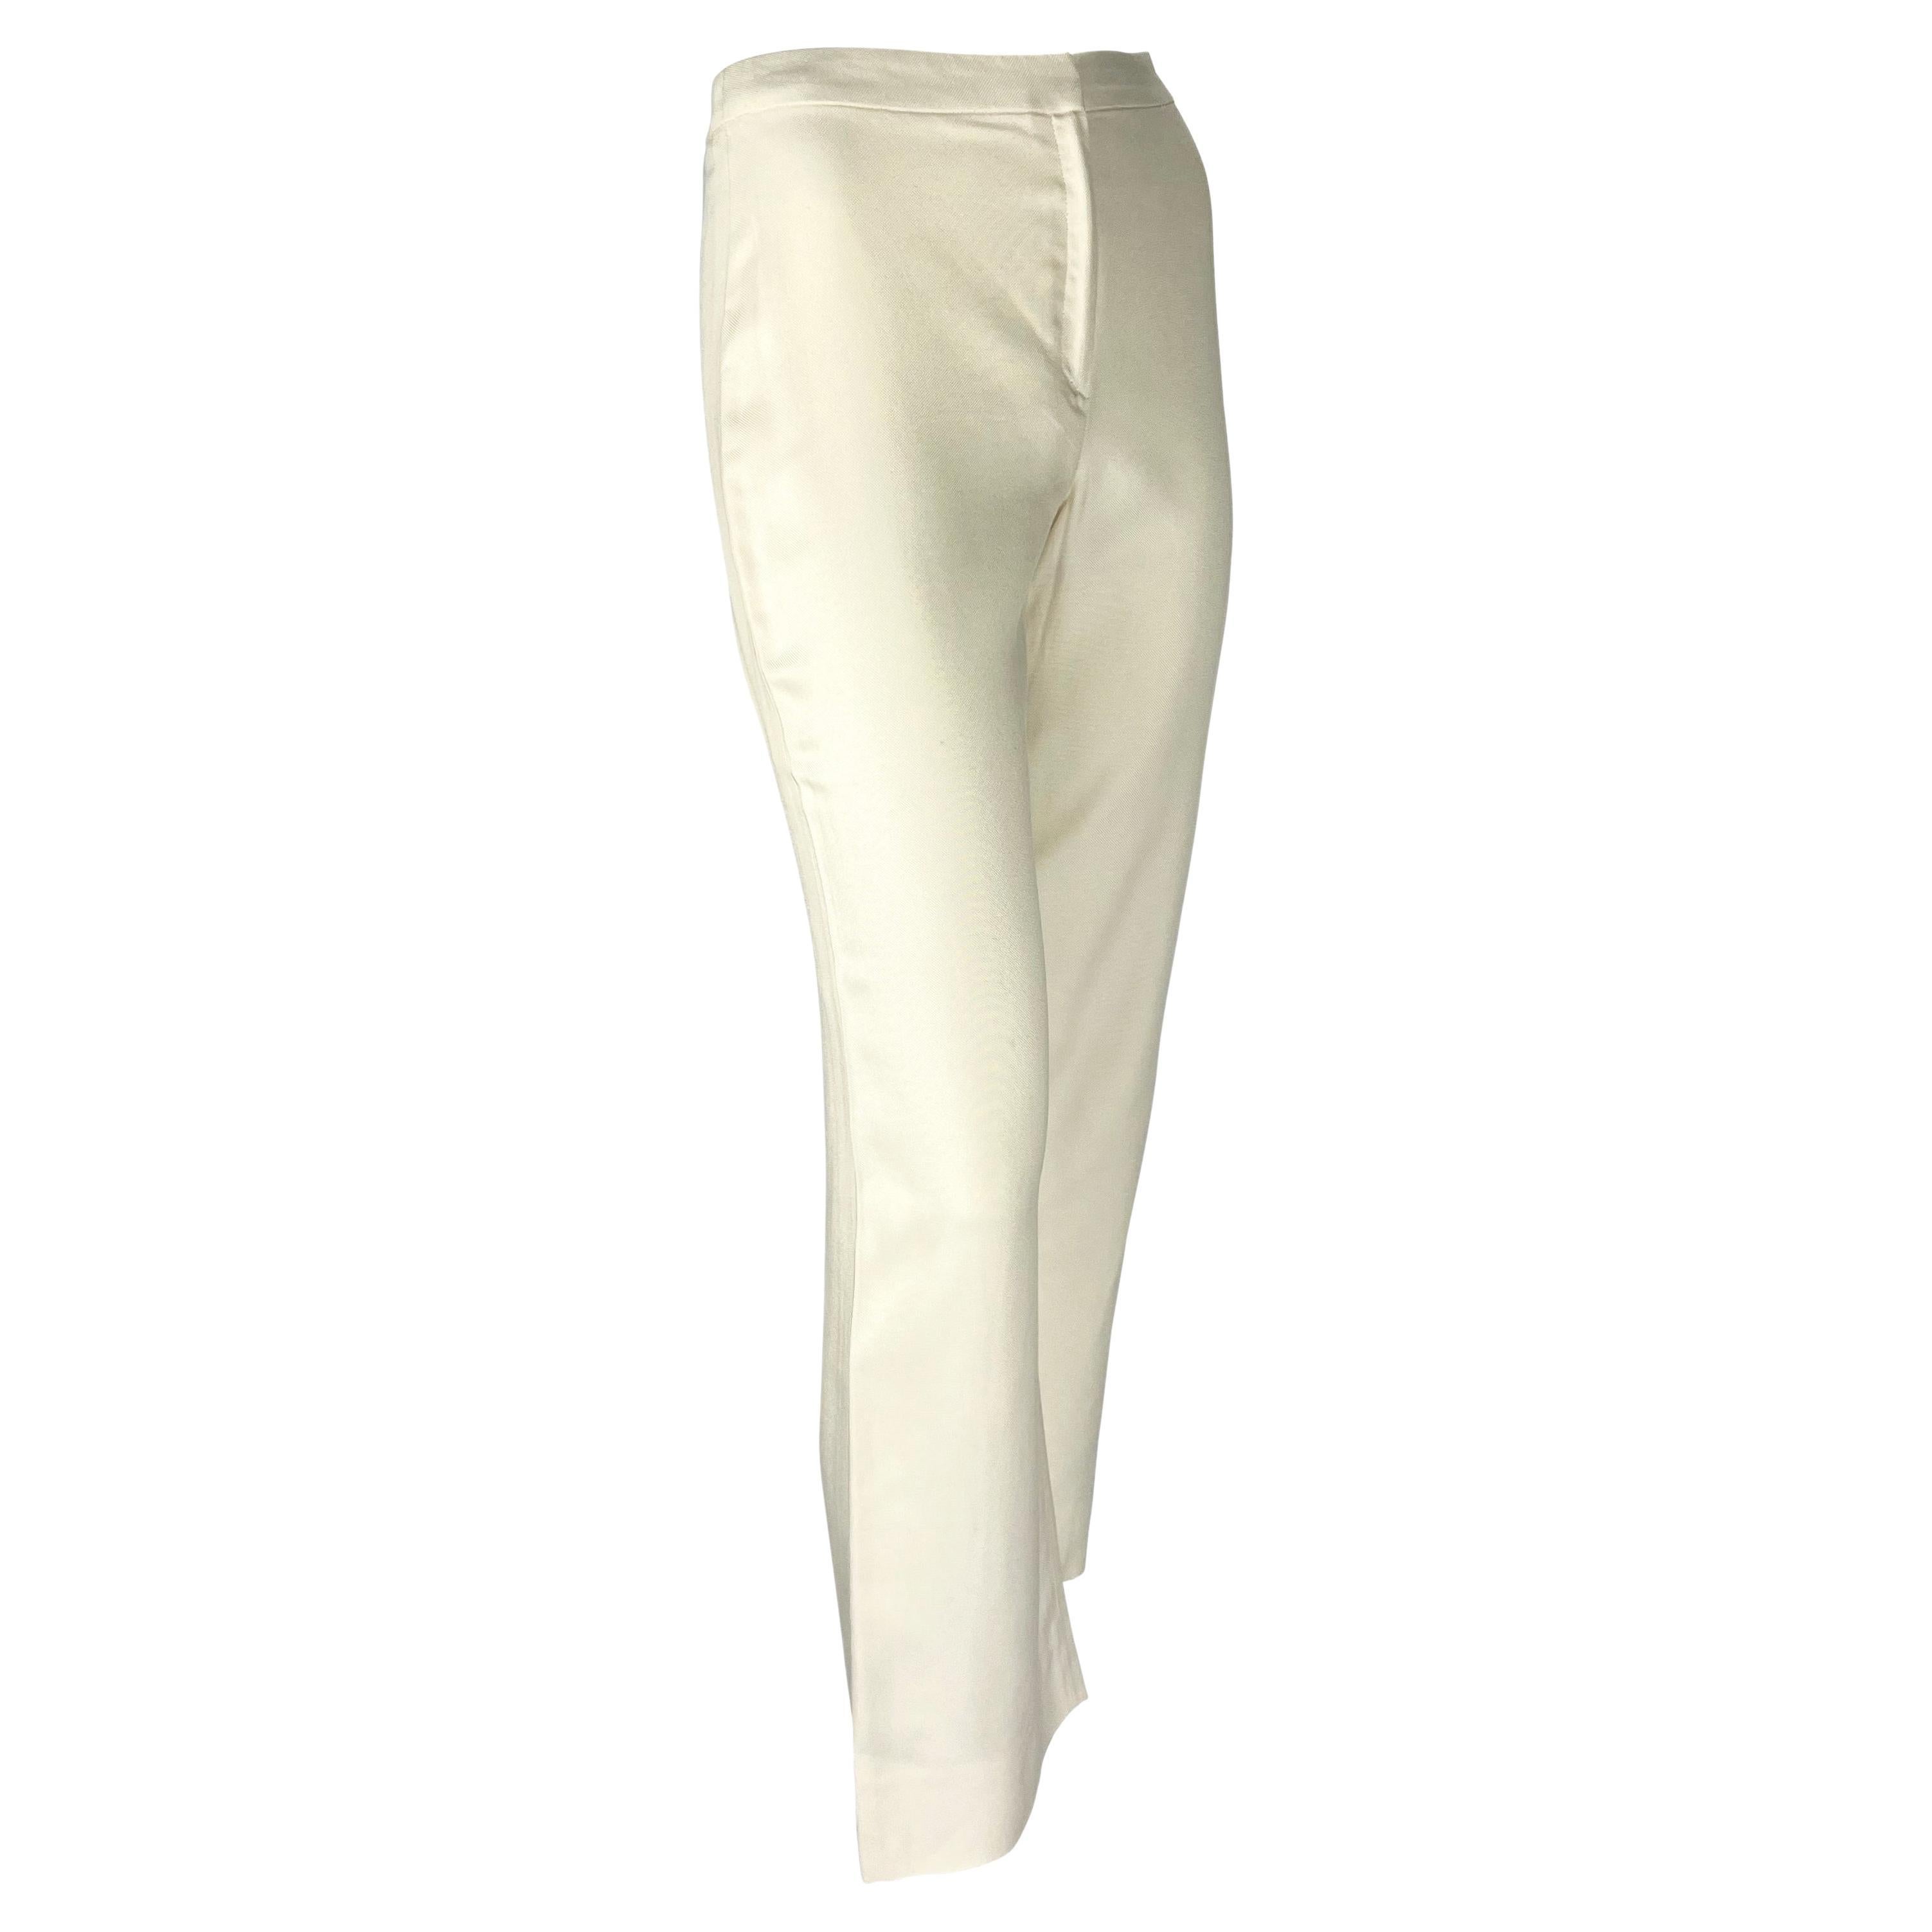 S/S 2000 Gianni Versace by Donatella Off-White Silk Tapered Pants For Sale 1